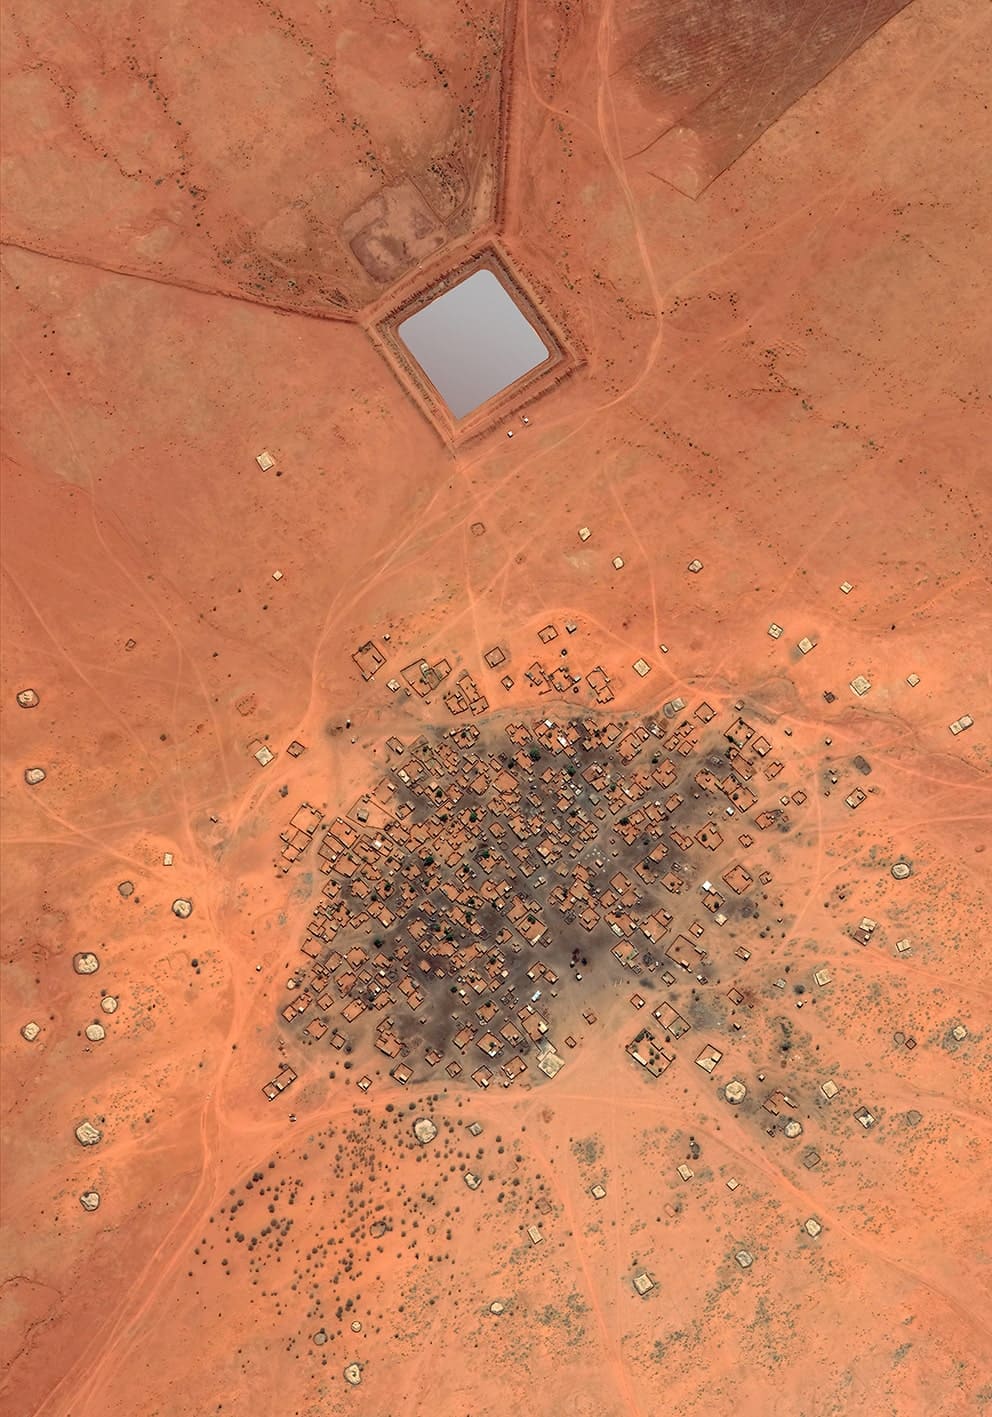 Human’s City 8 Sudan (with mirror), 2020, satellite photography, cm 120×84, limited edition 9